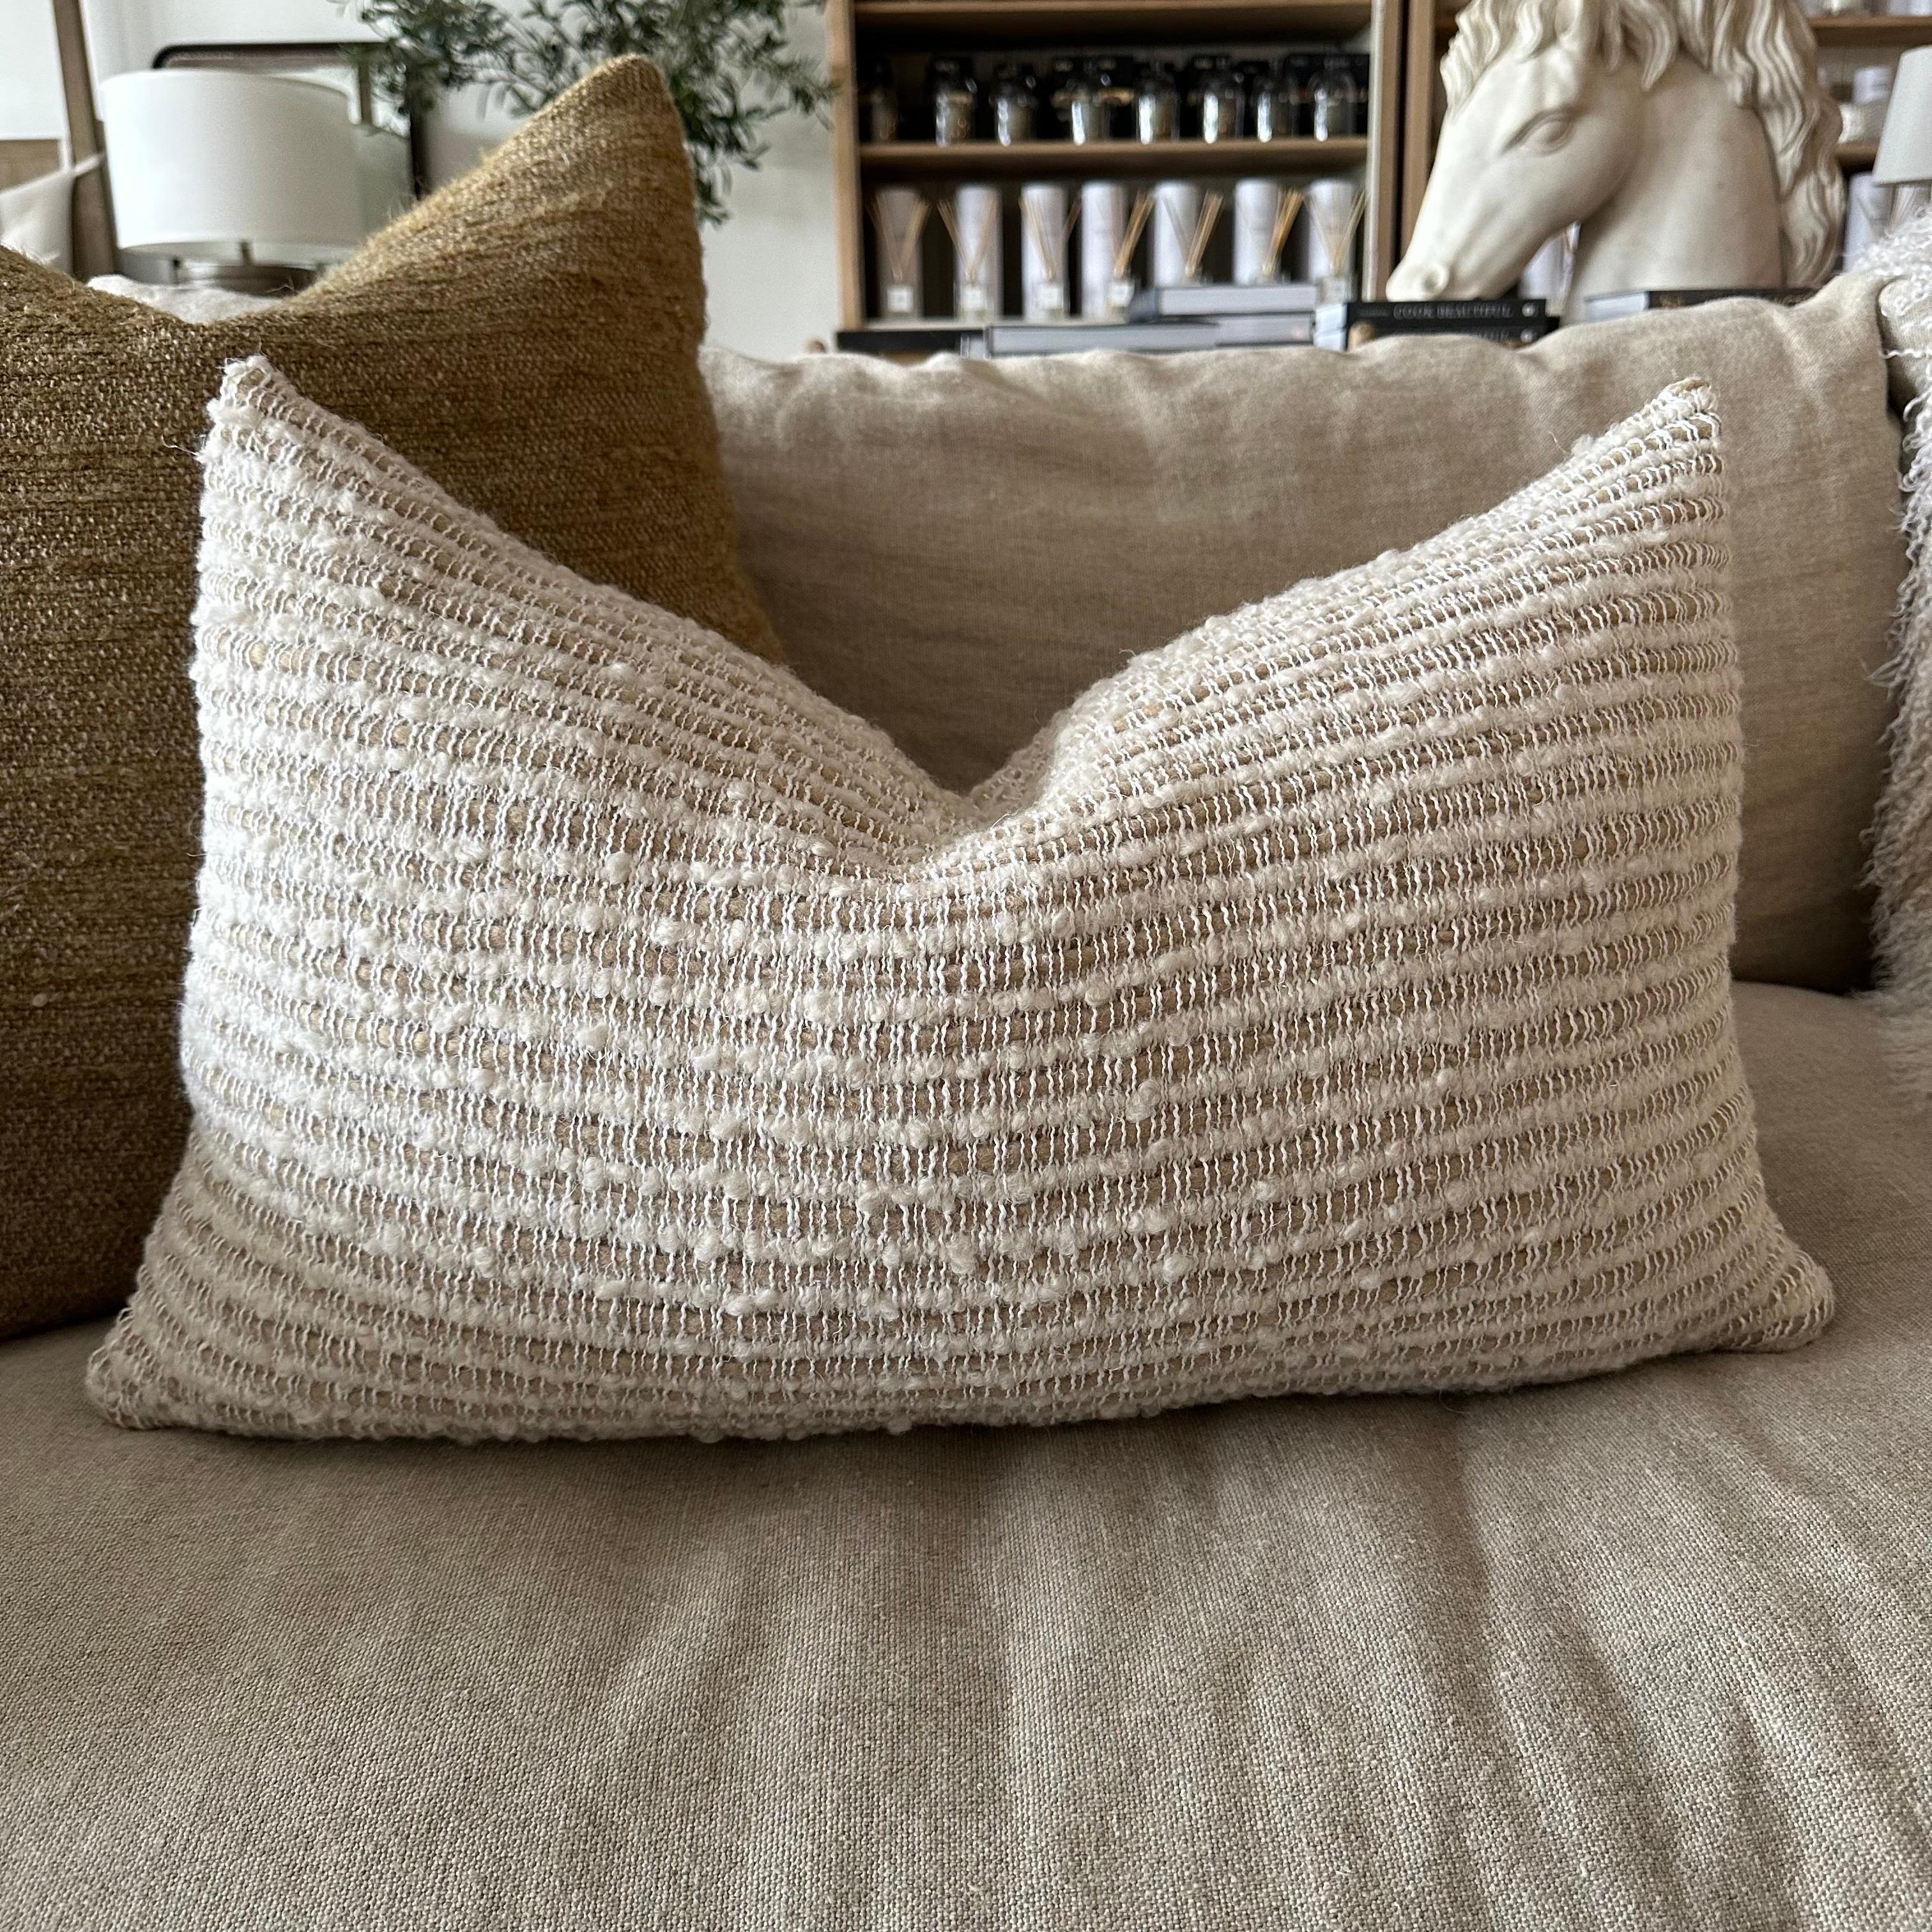 Woven in Belgium using traditional weaving techniques, Sandra pillow features a soft chunky mixed sheep & Alpaca wool yarn on white linen warp. If this item is backordered, please allow 2-3 weeks for production.
Includes a down Insert
Color: